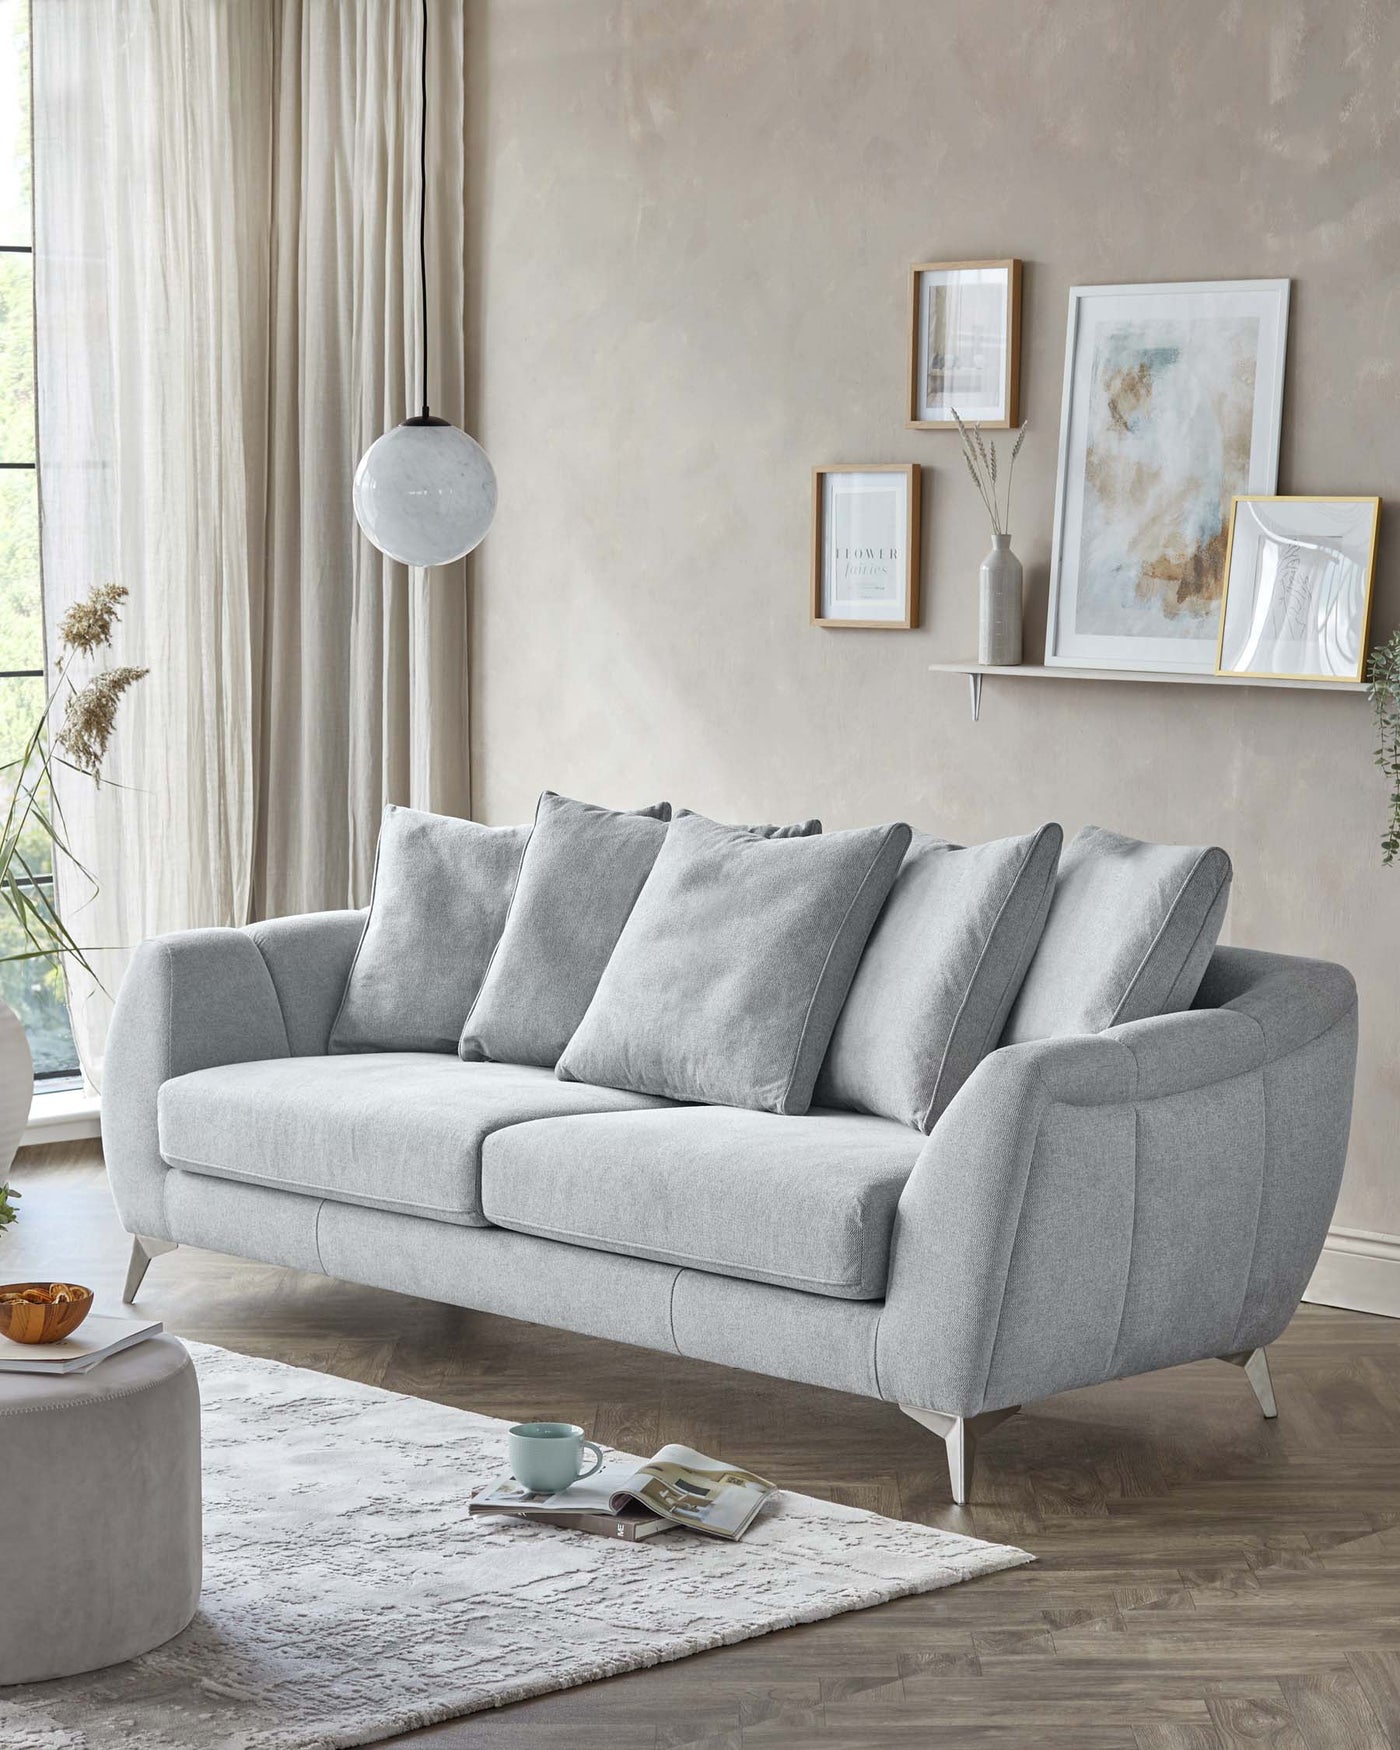 Elegant modern living room setup featuring a light grey three-seater sofa with plush back cushions and sloping armrests, complemented by angled wooden legs. A circular, light grey fabric ottoman sits on an area rug in front of the couch, alongside a small stack of books and a ceramic tea cup on a saucer.